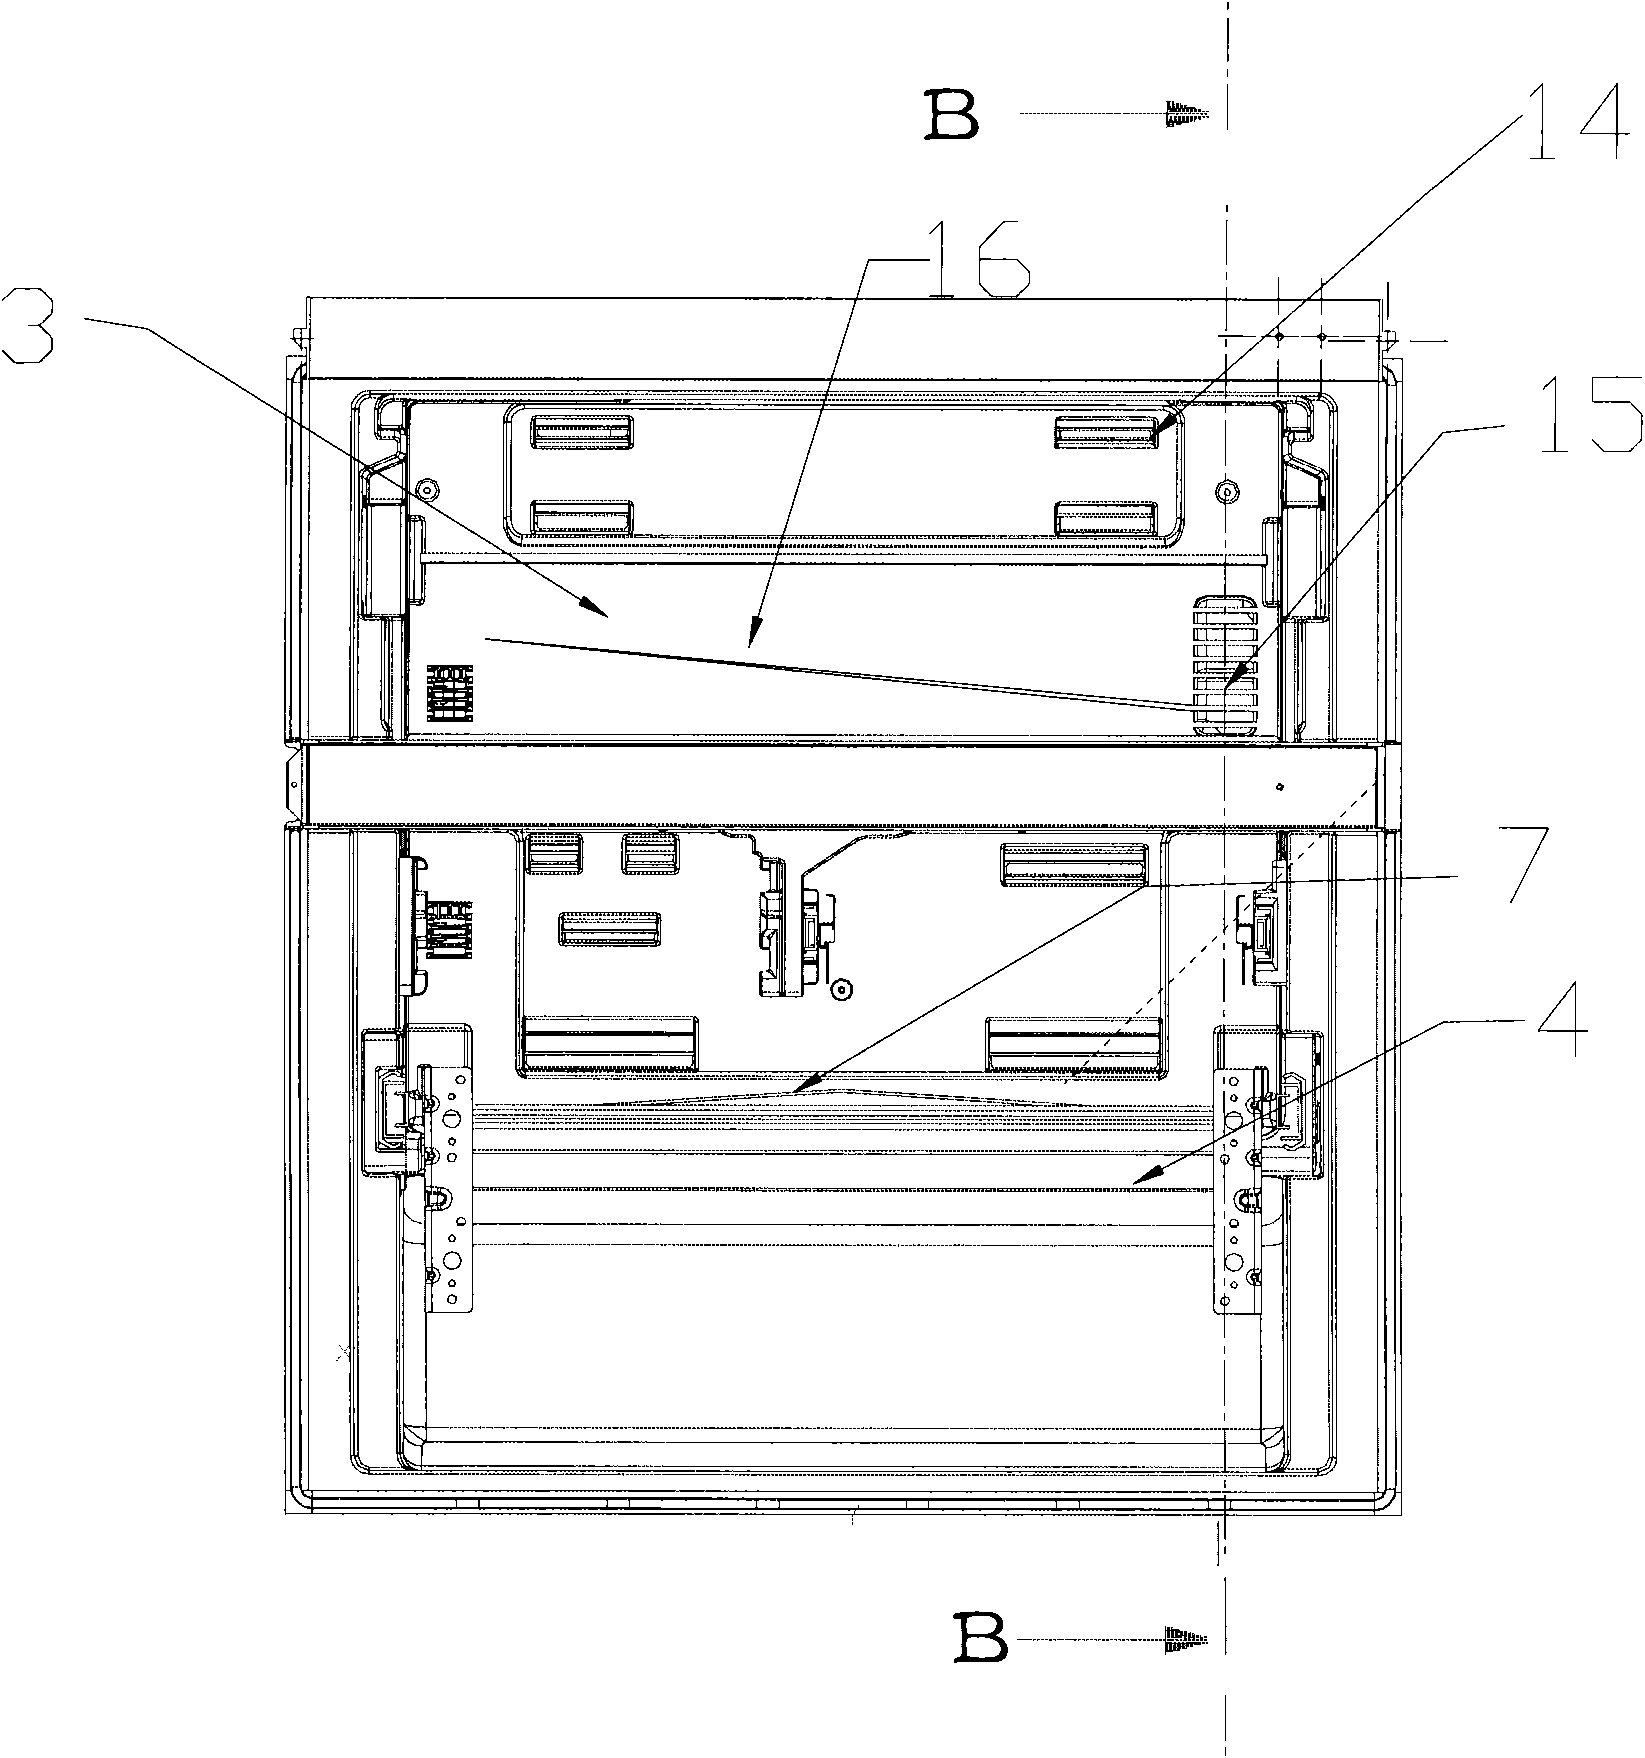 Condensed water collecting device